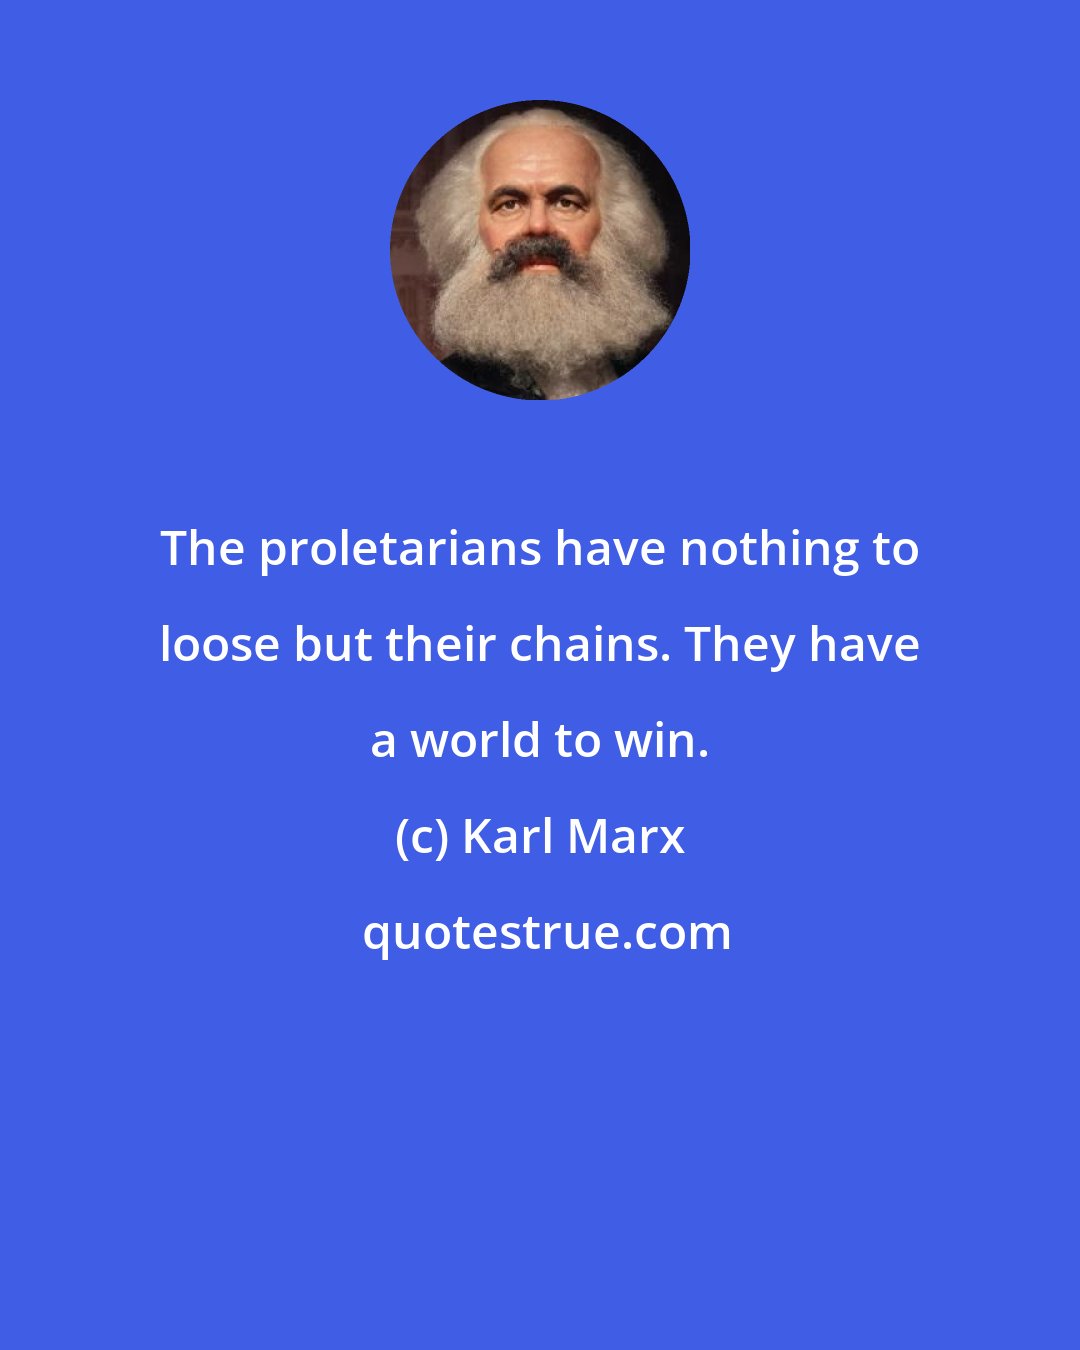 Karl Marx: The proletarians have nothing to loose but their chains. They have a world to win.